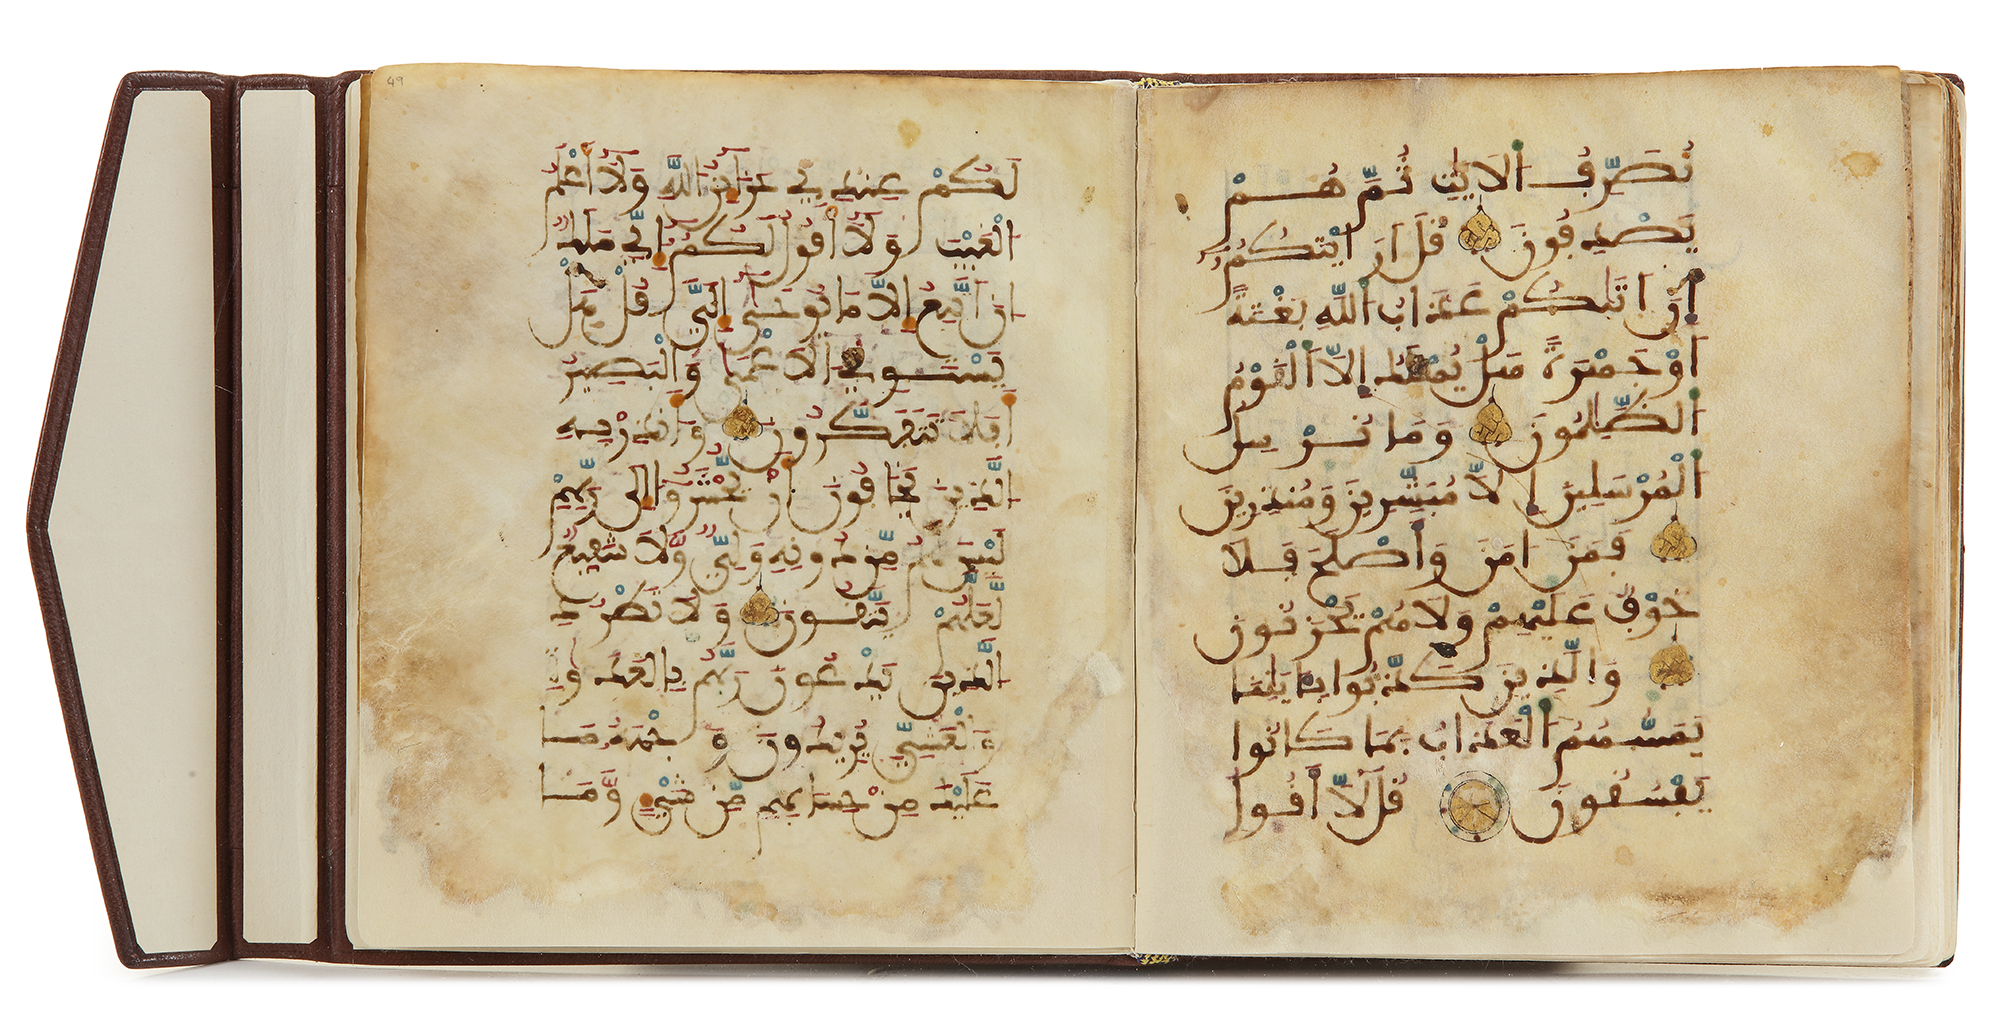 A MAGHRIBI SCRIPT QURAN SECTION, NORTH-AFRICA OR ANDALUSIA, CIRCA 13TH CENTURY - Image 3 of 4